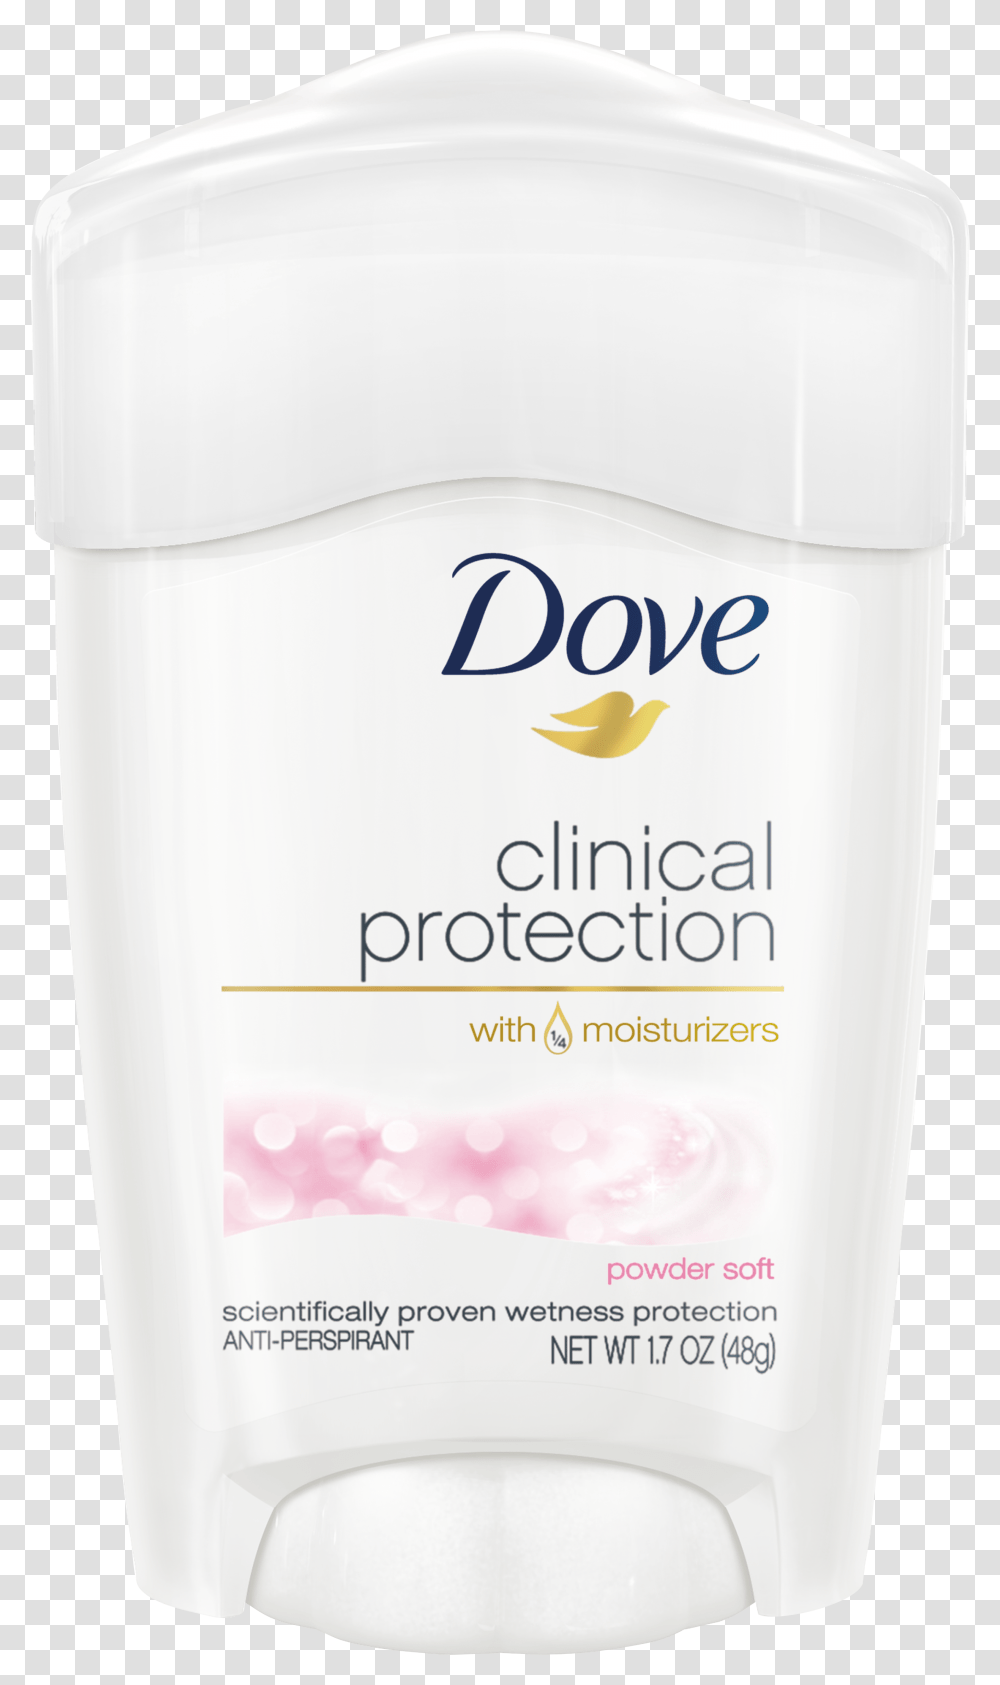 Dove Clinical Protection Antiperspirant Dove Clinical Protection With 1 4 Moisturizers Transparent Png